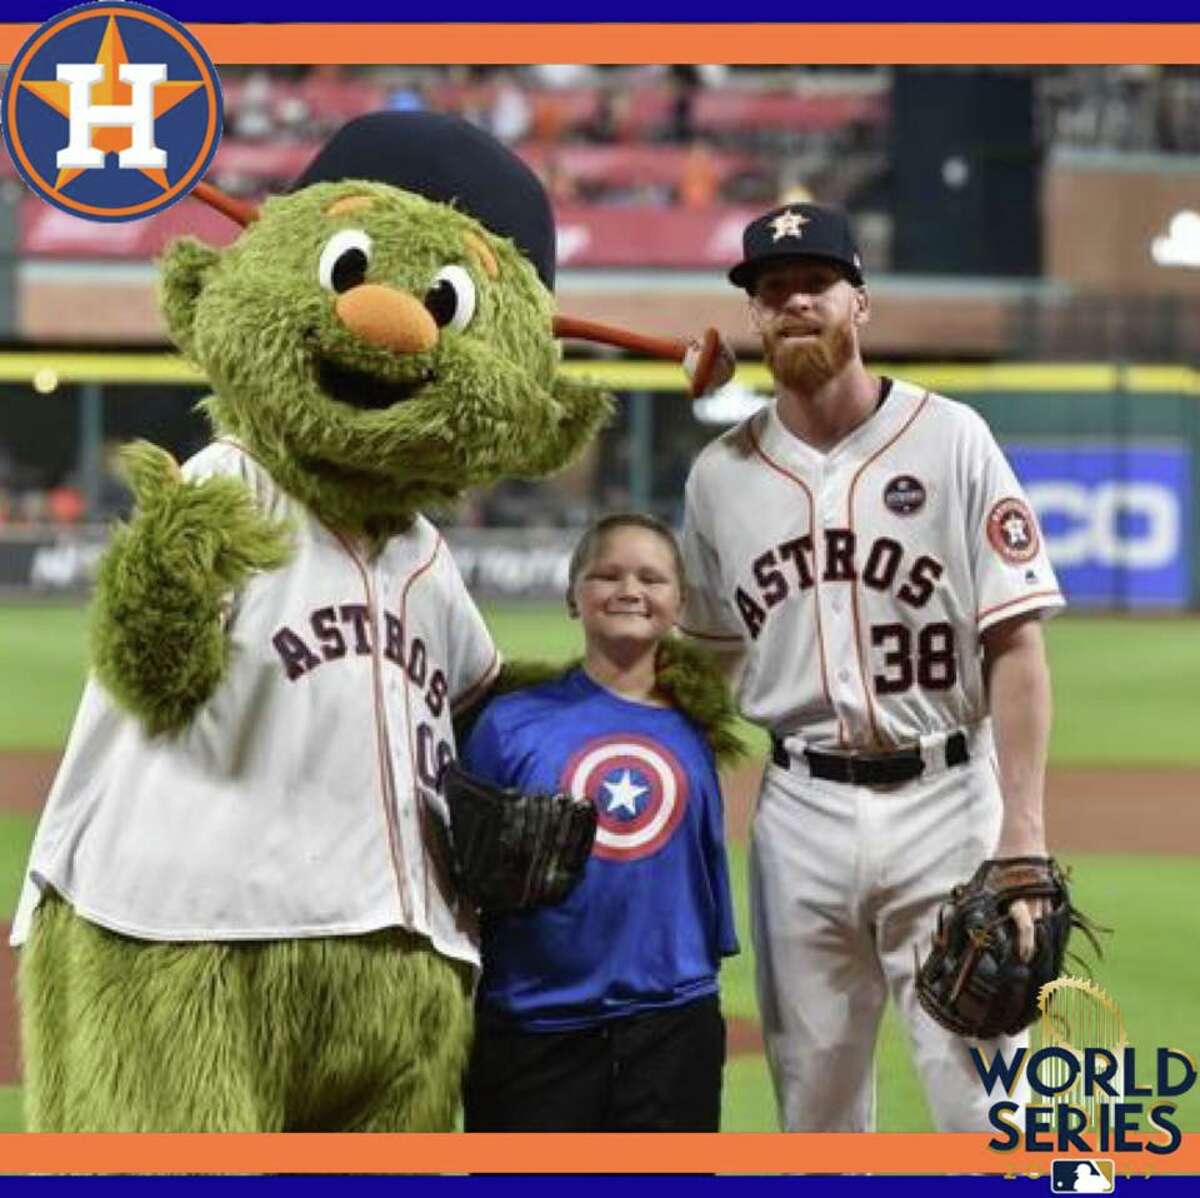 From Houston to Philadelphia to Paris, Astros fans from around the world shared photos of themselves to Chron.com representing their World Series team.